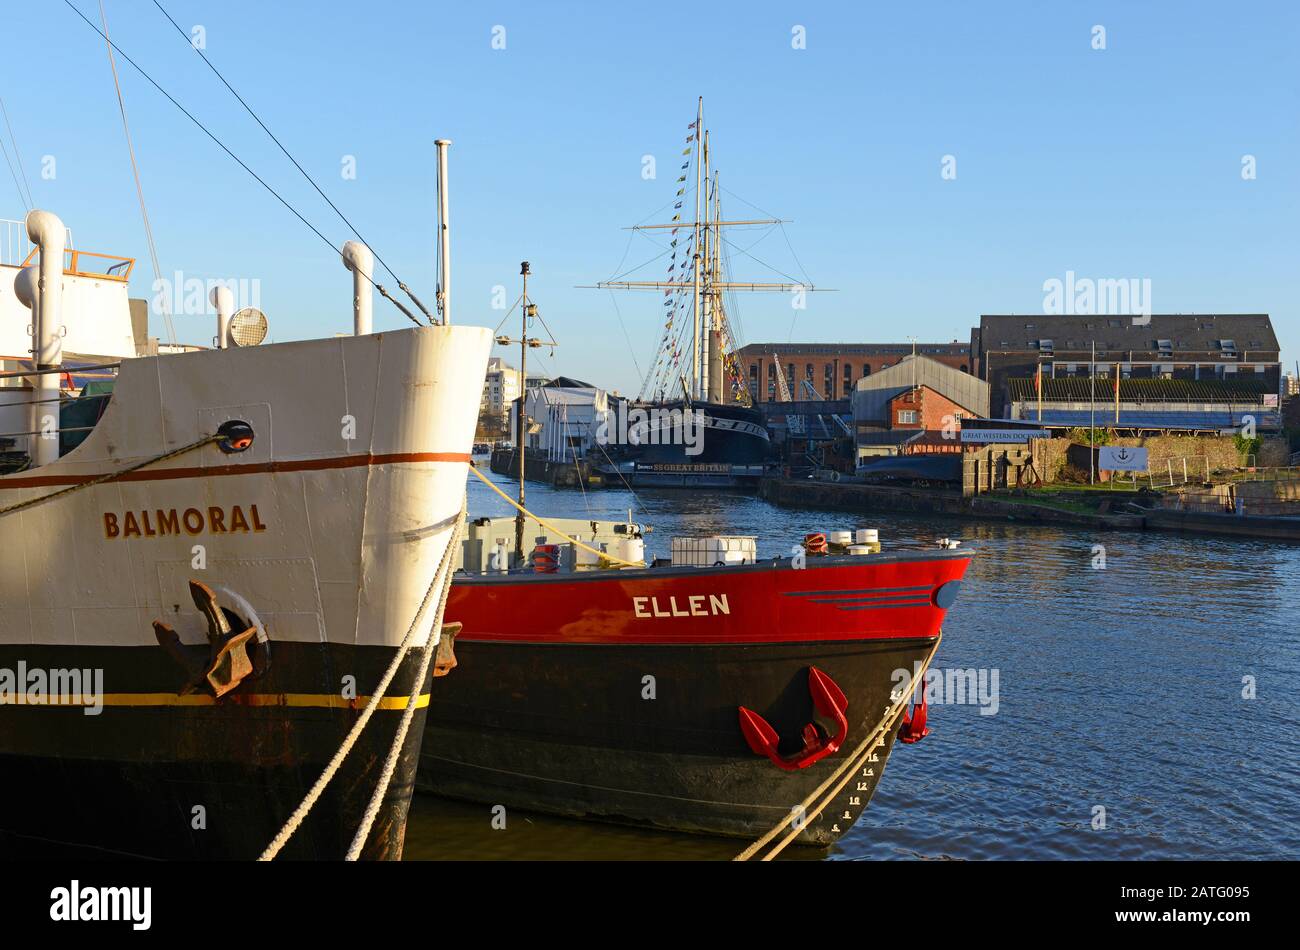 Bows of the Balmoral and the Ellen seen moored opposite the SS Great Britain in the floating harbour in the city docks, Bristol, UK, on a sunny day Stock Photo